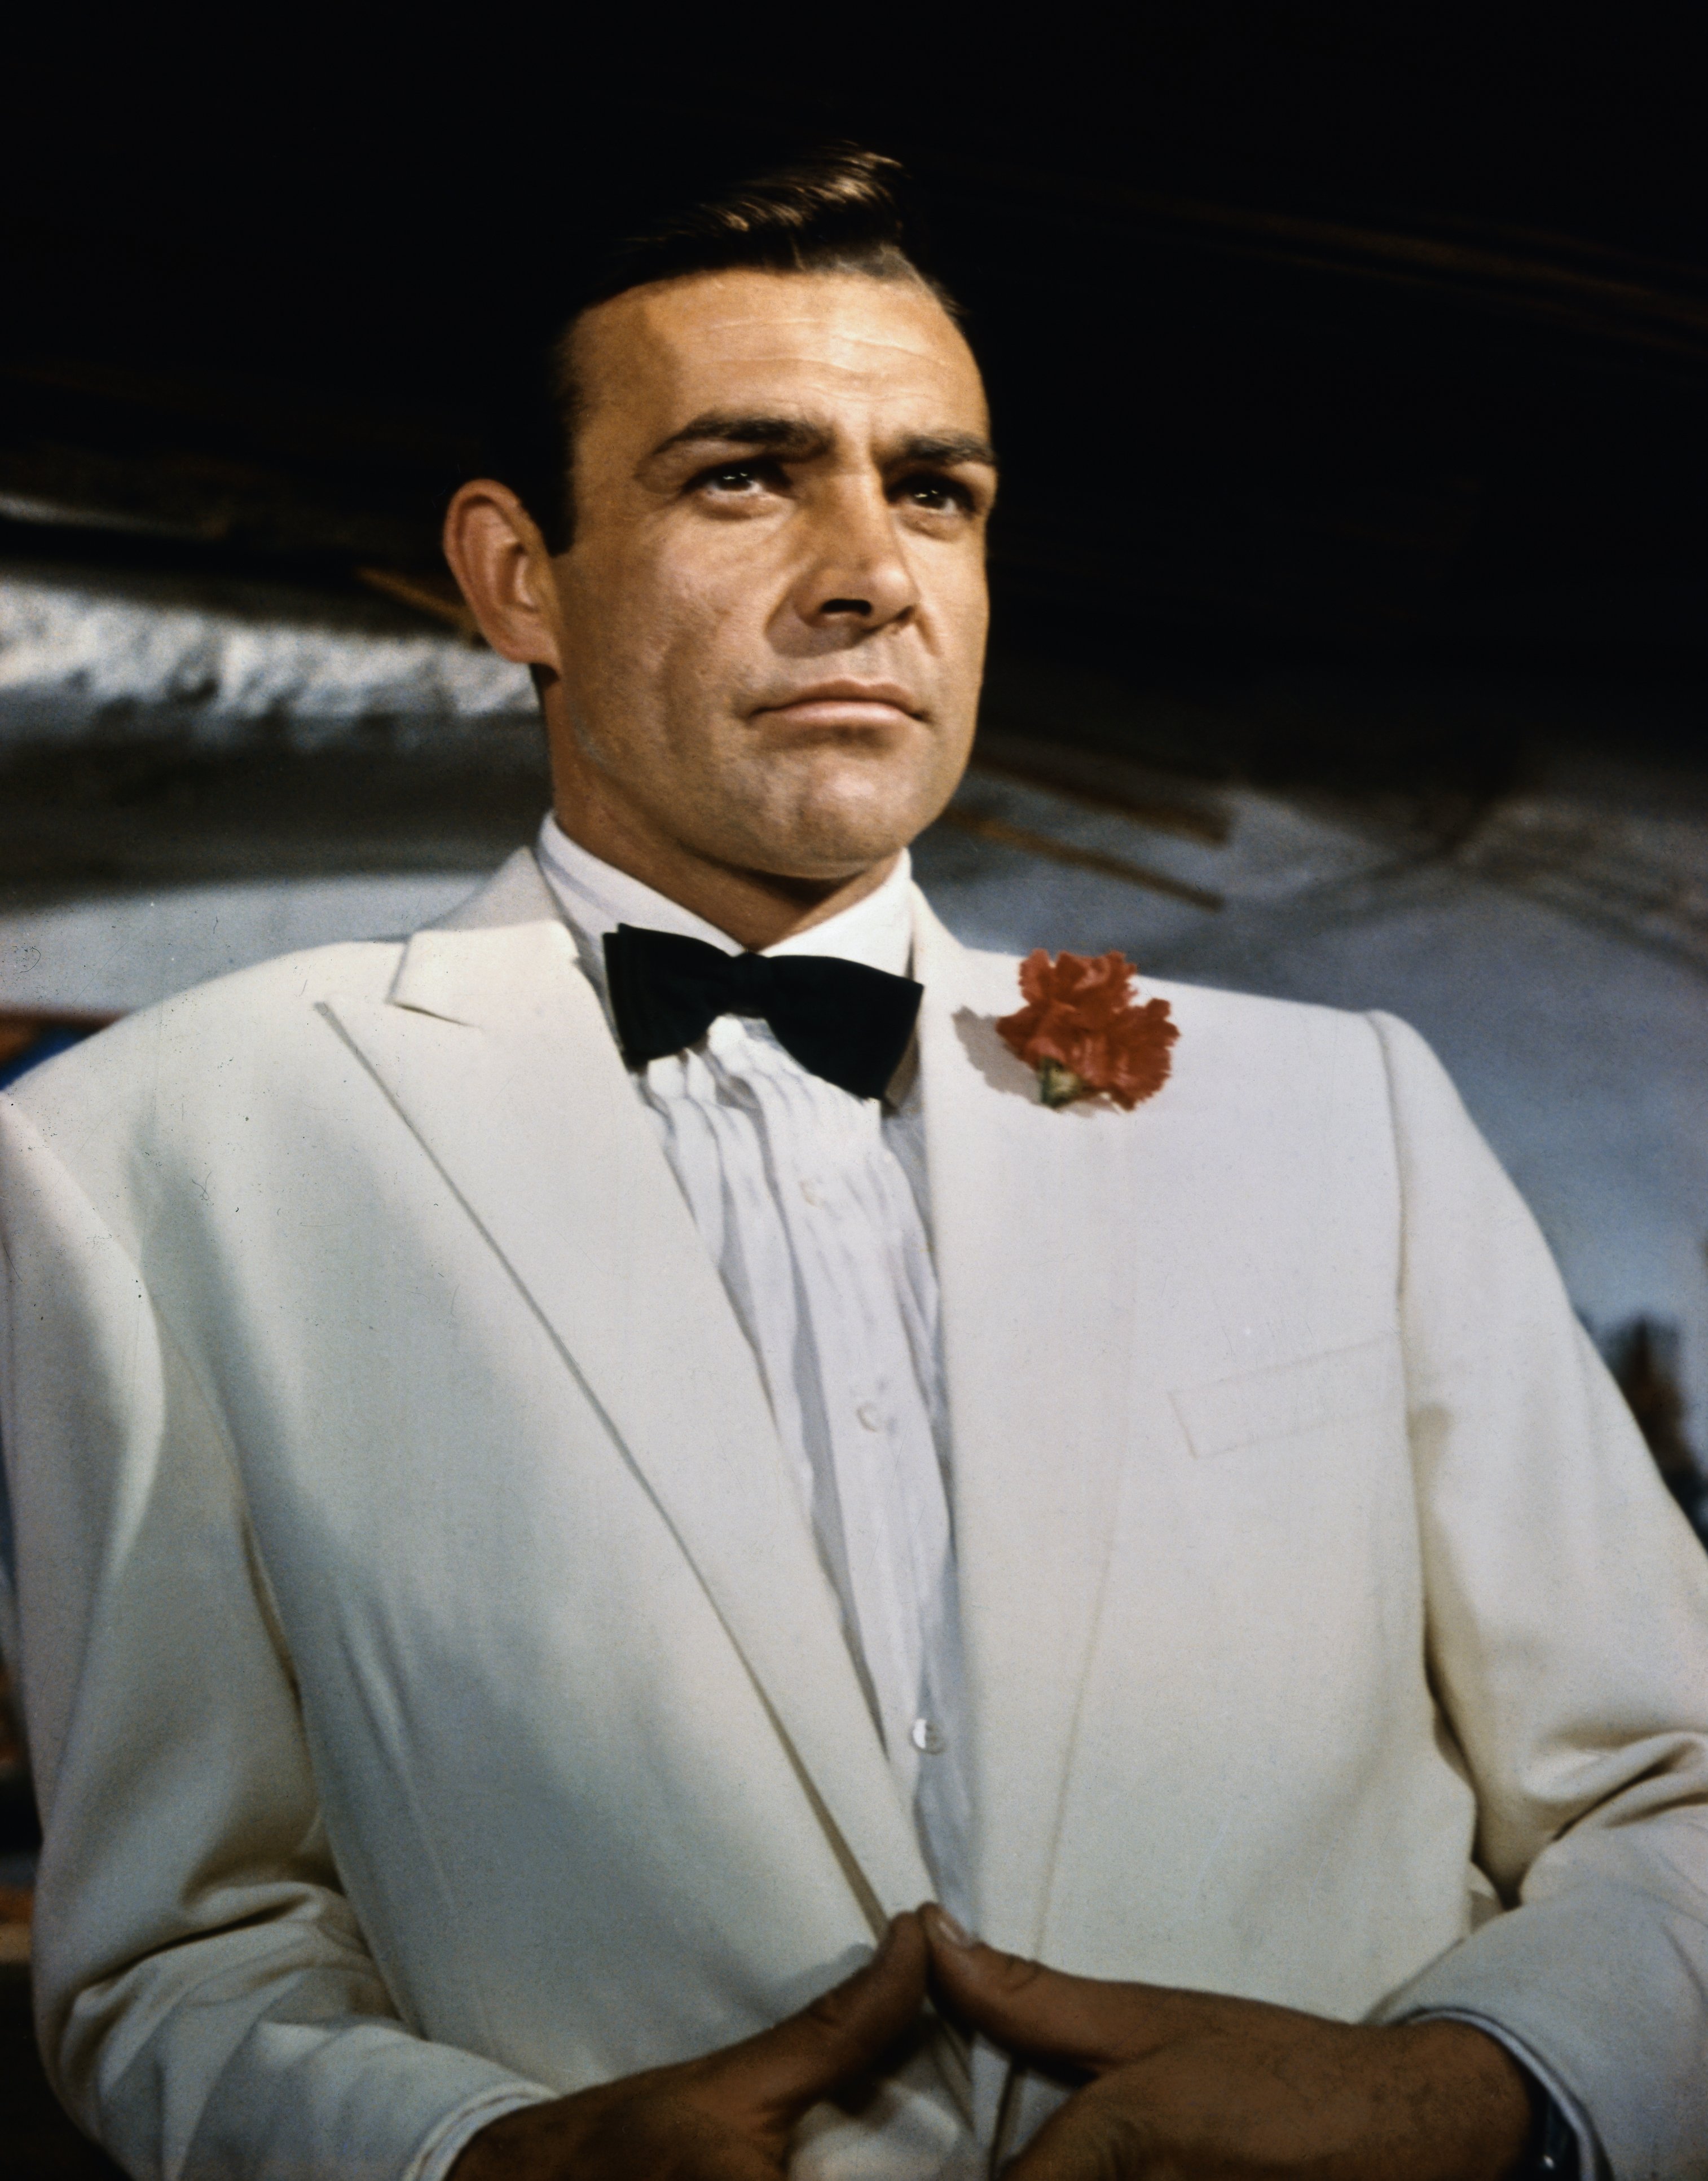 Sean Connery, as James Bond, in 1966 | Source: Getty Images